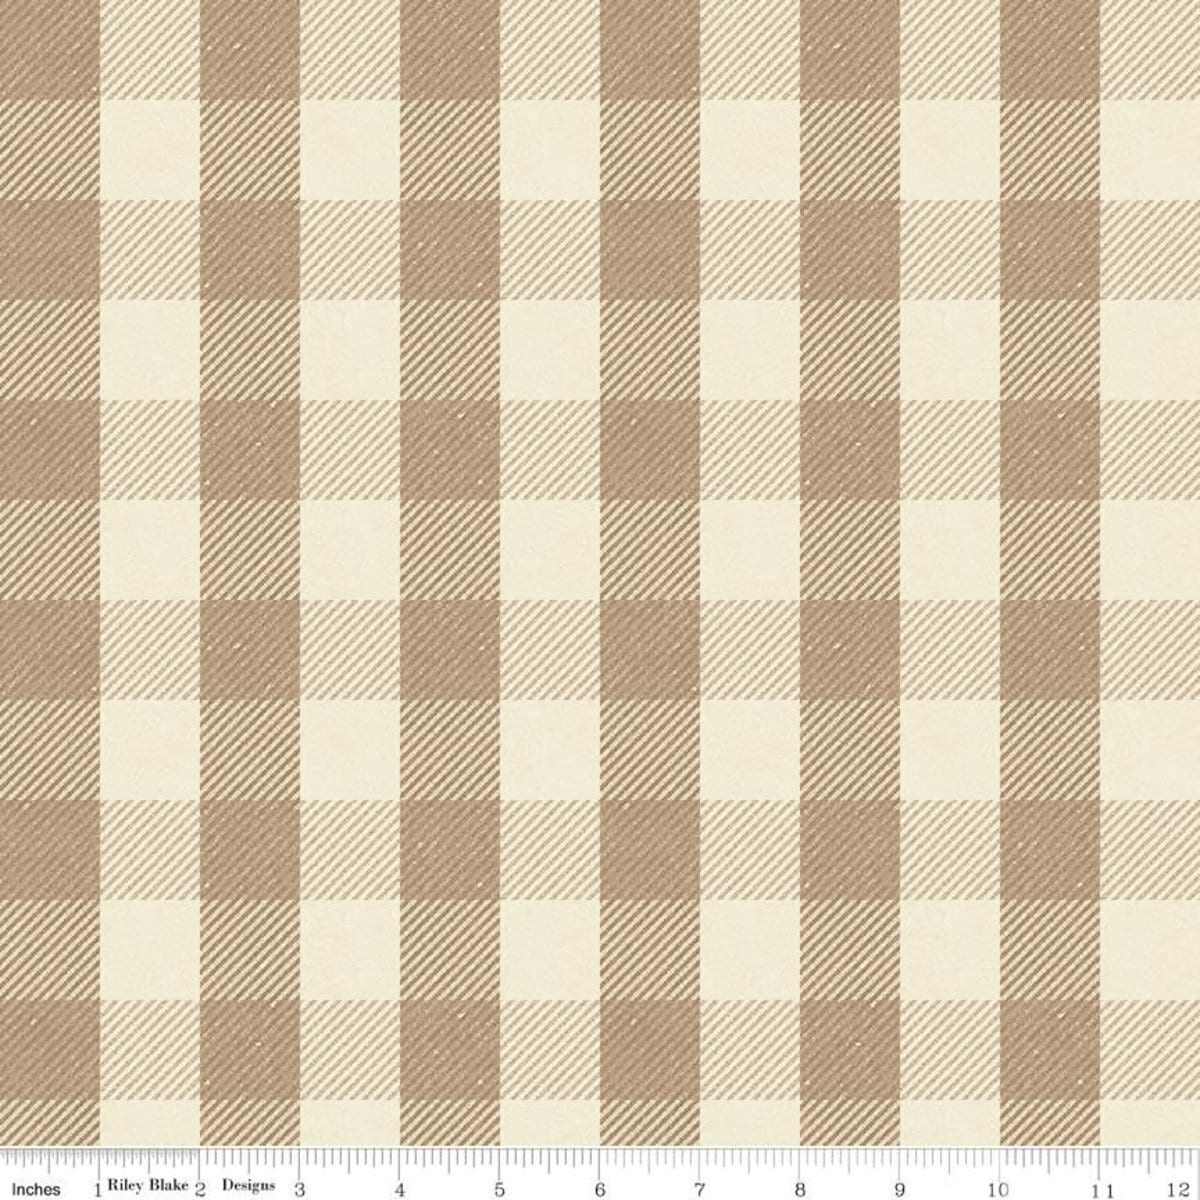 SALE! Miss Callie Close-Out Designer Wool Gingham Fabric Tweed By the Yard